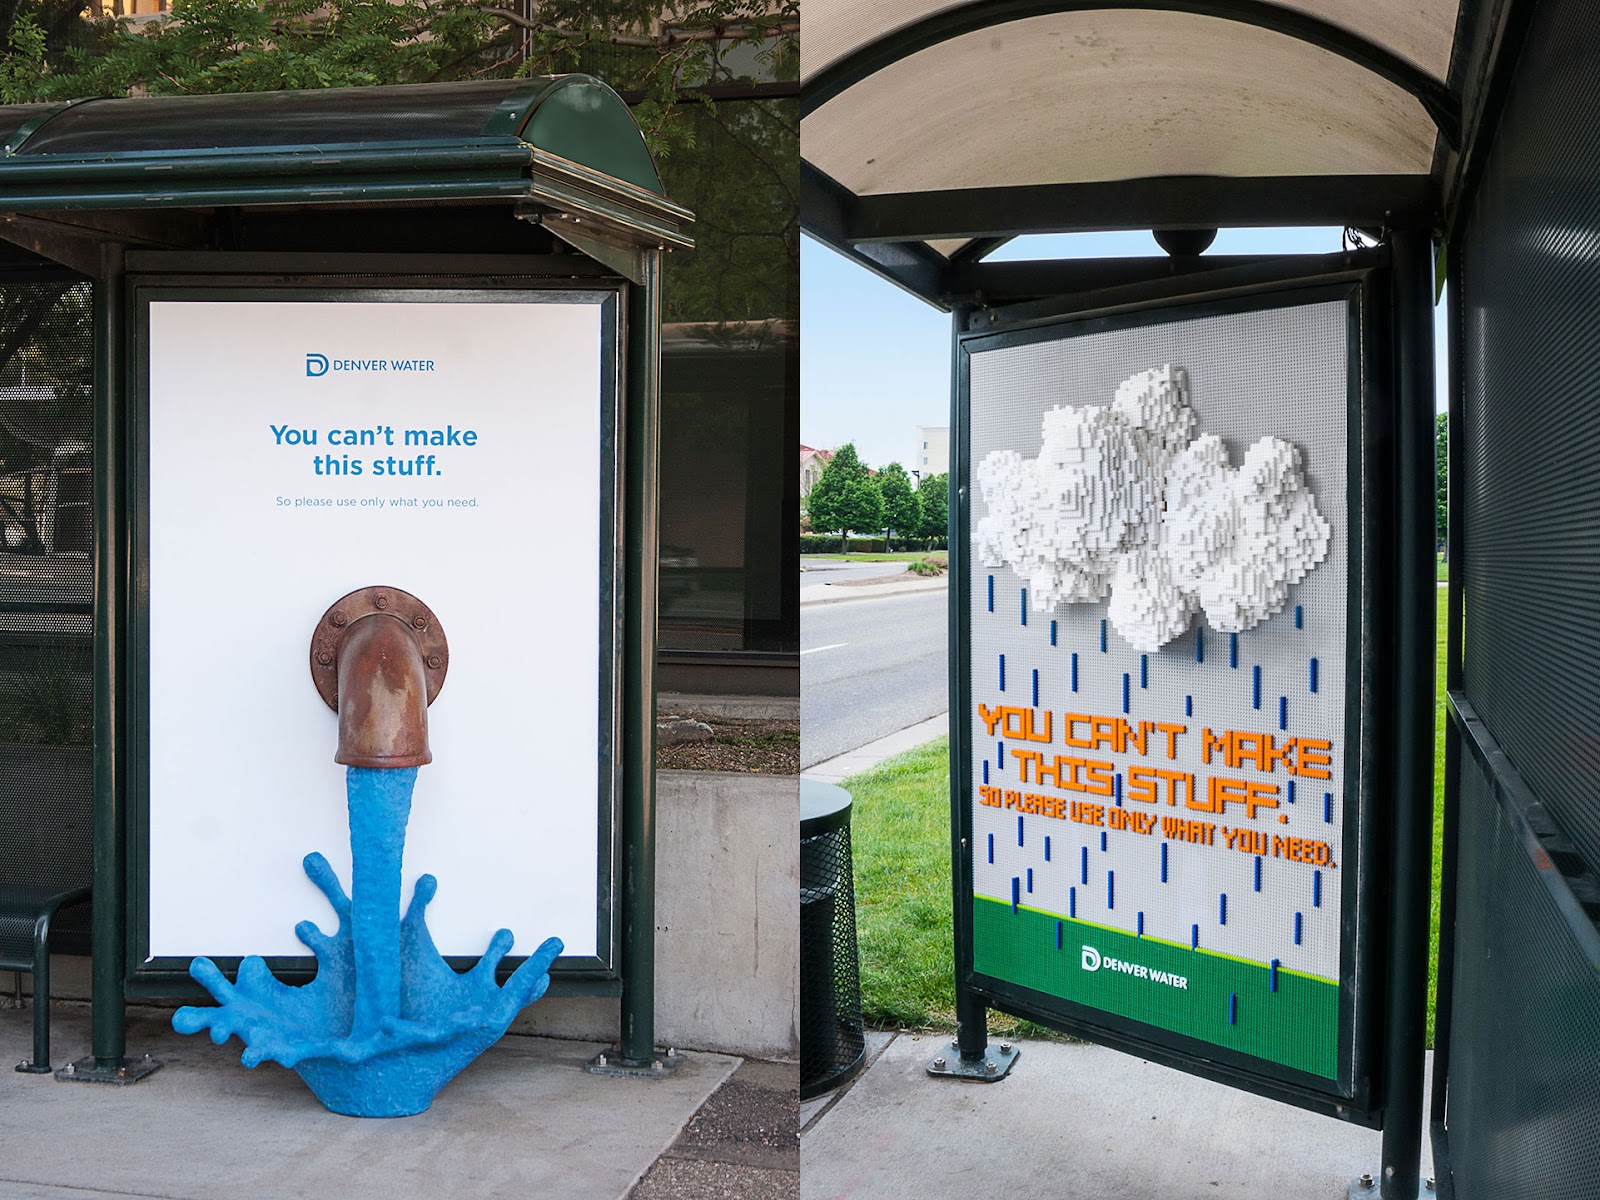 billboard on the left with the sculpture of a running faucet, billboard on the right with the sculpture of a cloud raining. Both with the text "You can't make this stuff. So please use only what you need."